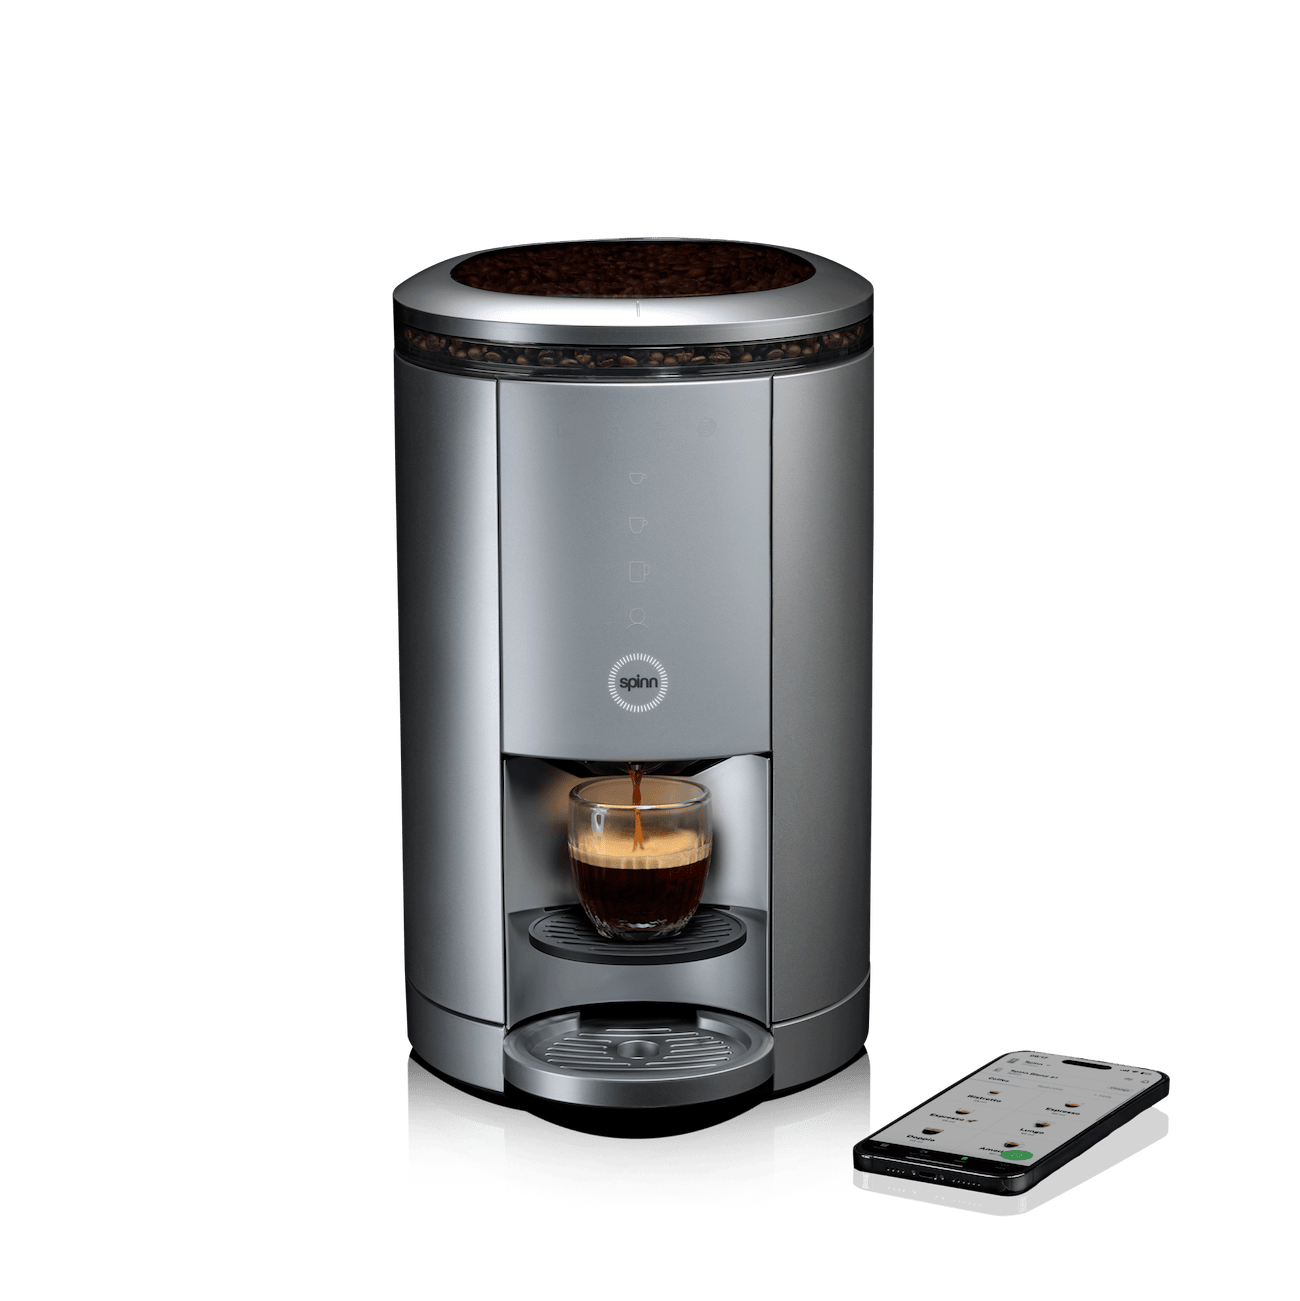 Spinn, the coffee maker for people who are too lazy to learn about coffee